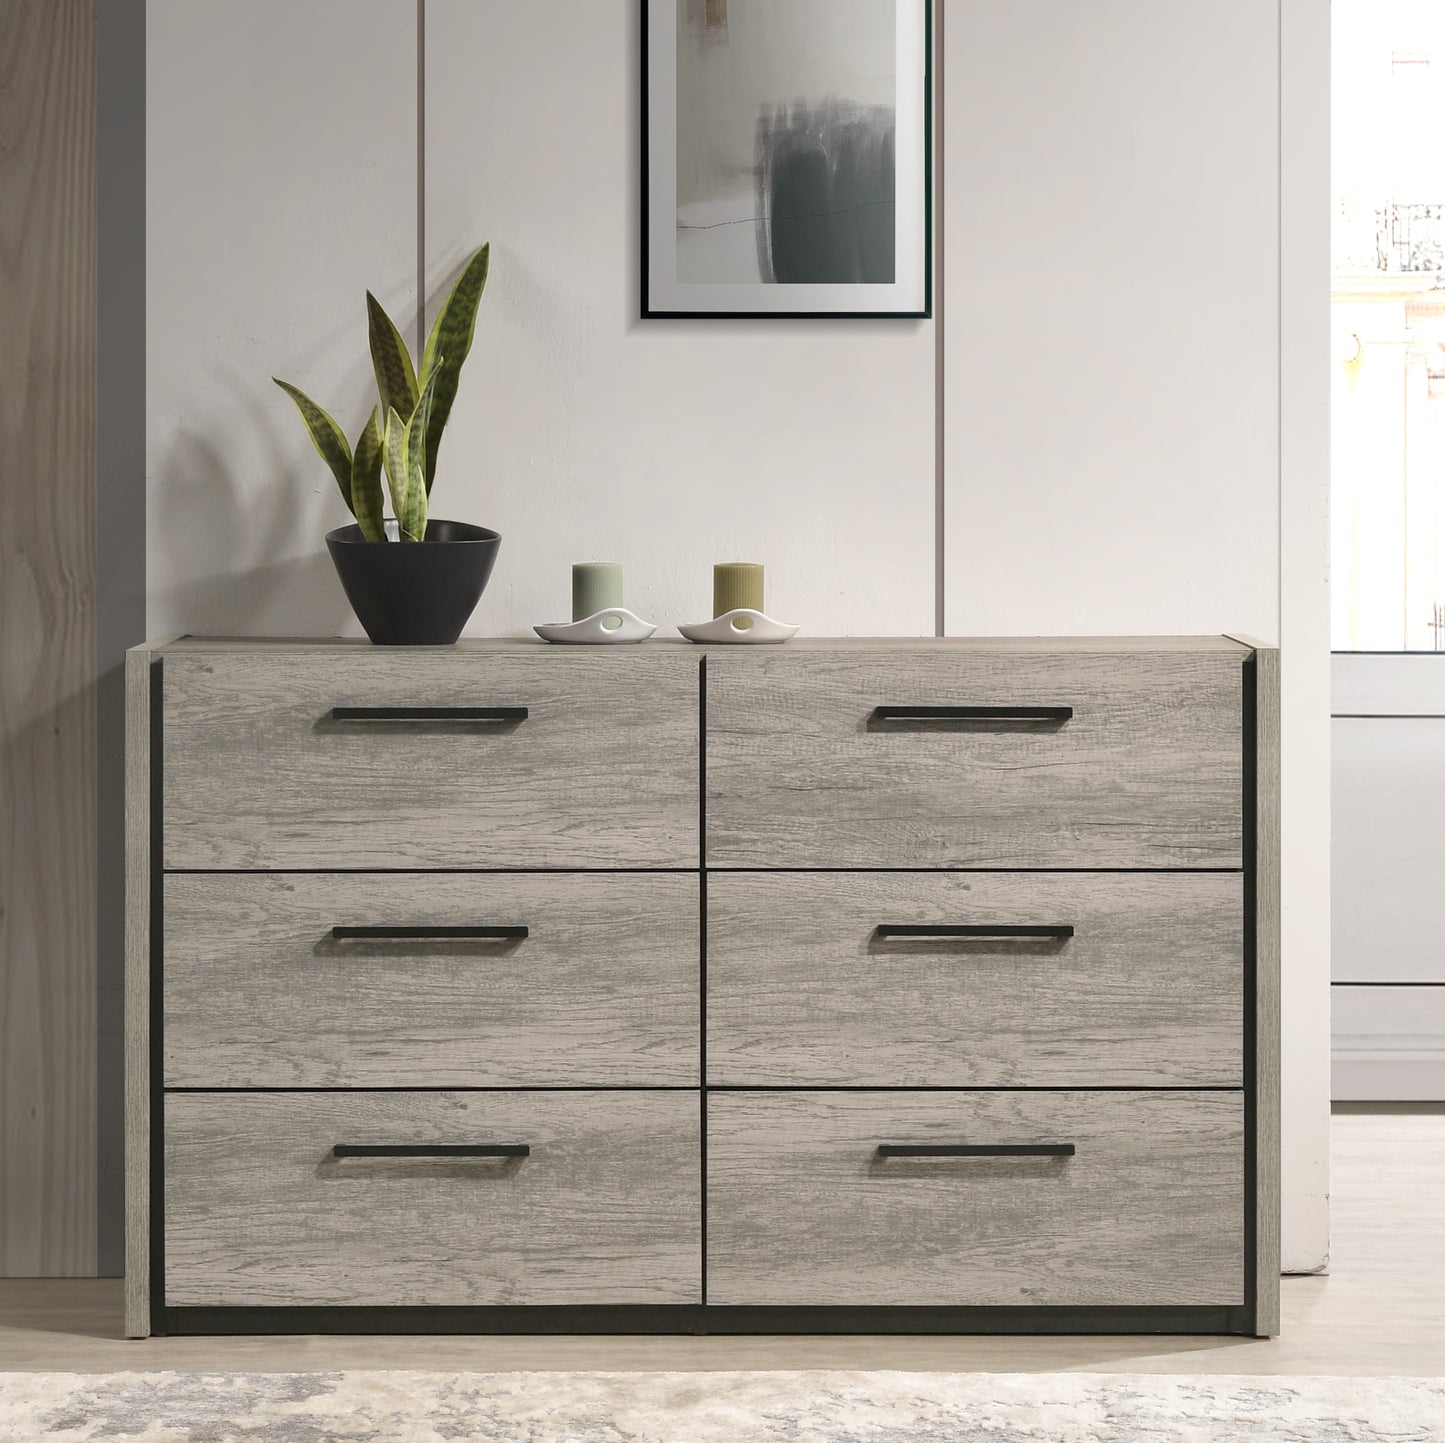 Roundhill Furniture Lenca 6-Drawer Dresser with Mirror - Weathered Gray